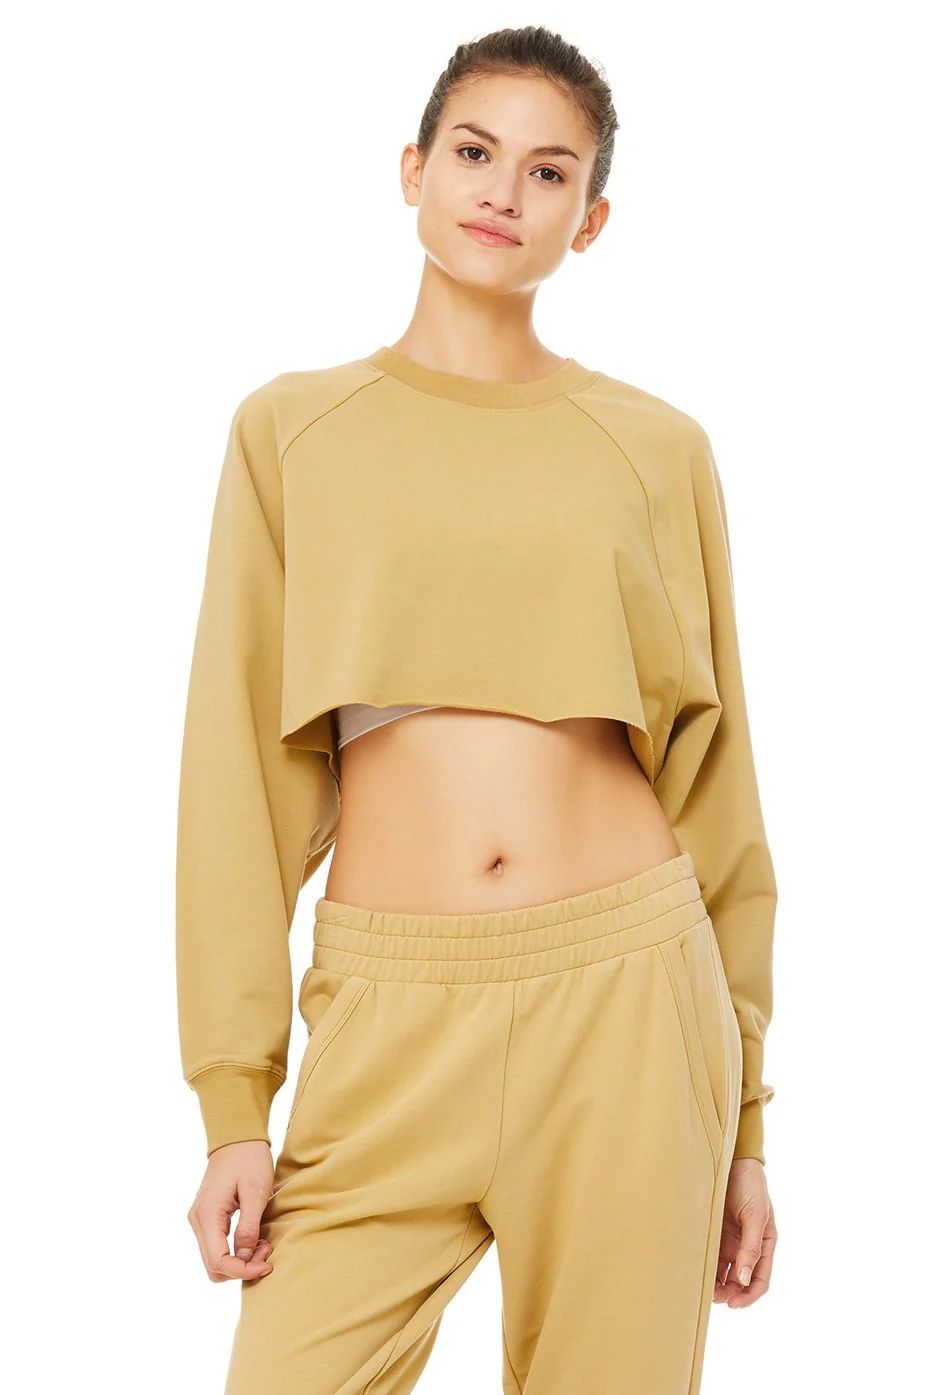 Double Take Pullover Top in Honey, Size: Large | Alo YogaÂ® | Alo Yoga